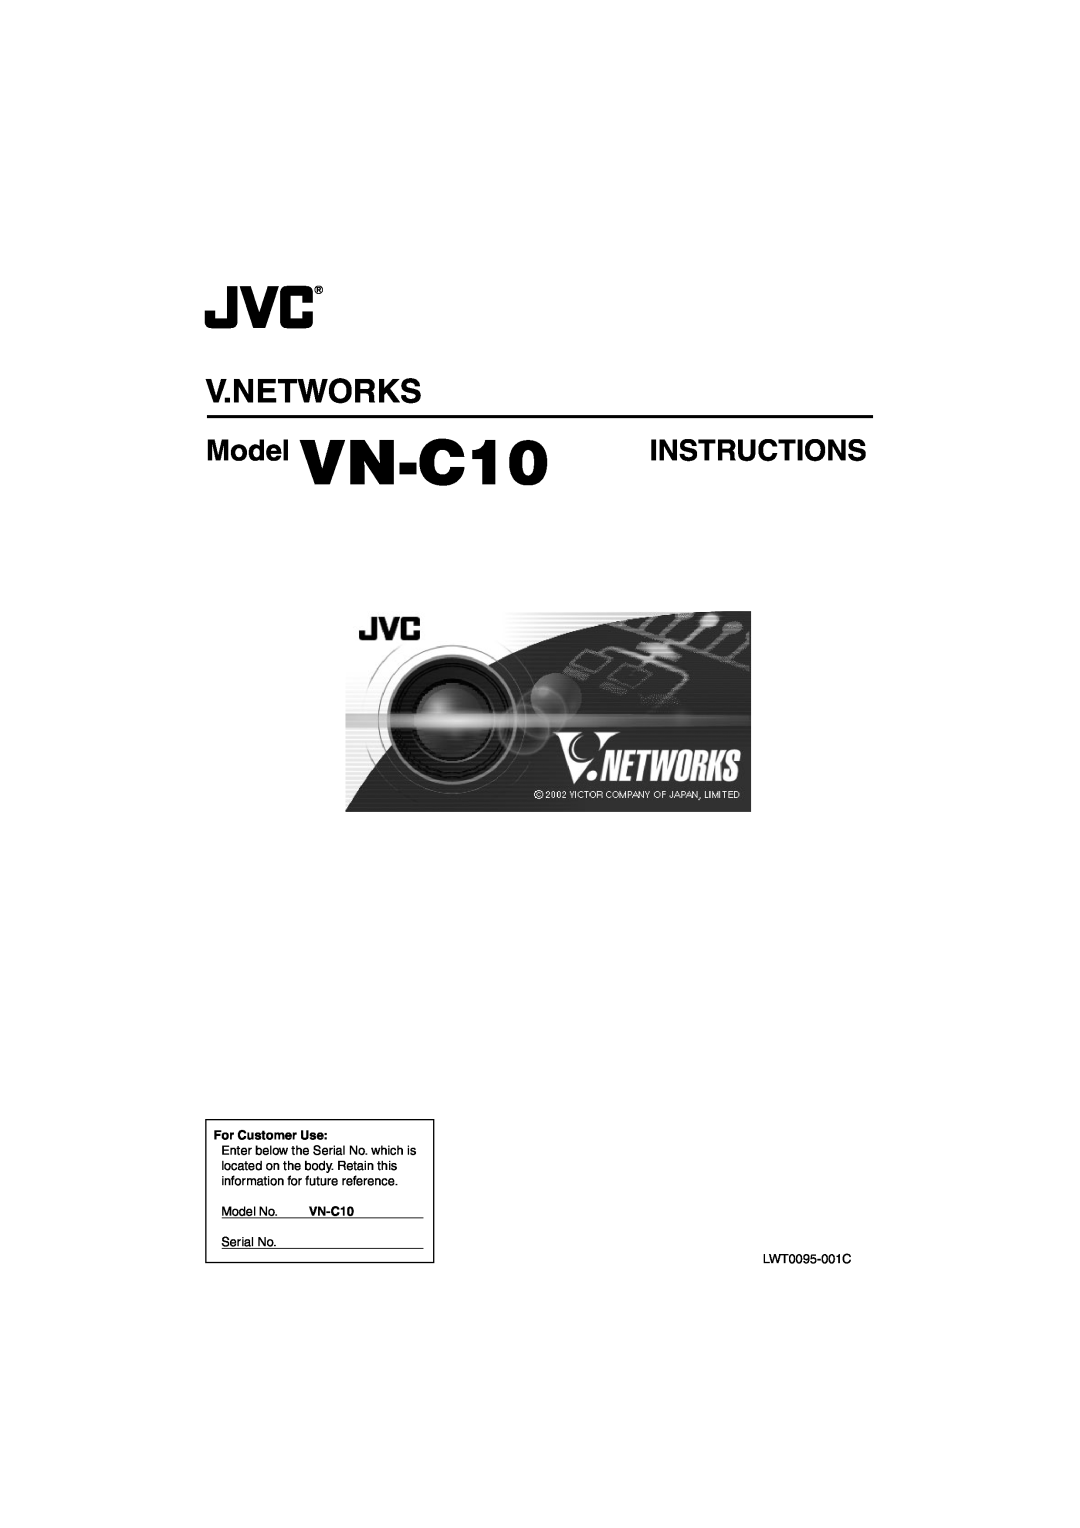 JVC manual V.Networks, Model VN-C10, Instructions, For Customer Use, Model No, Serial No LWT0095-001A 